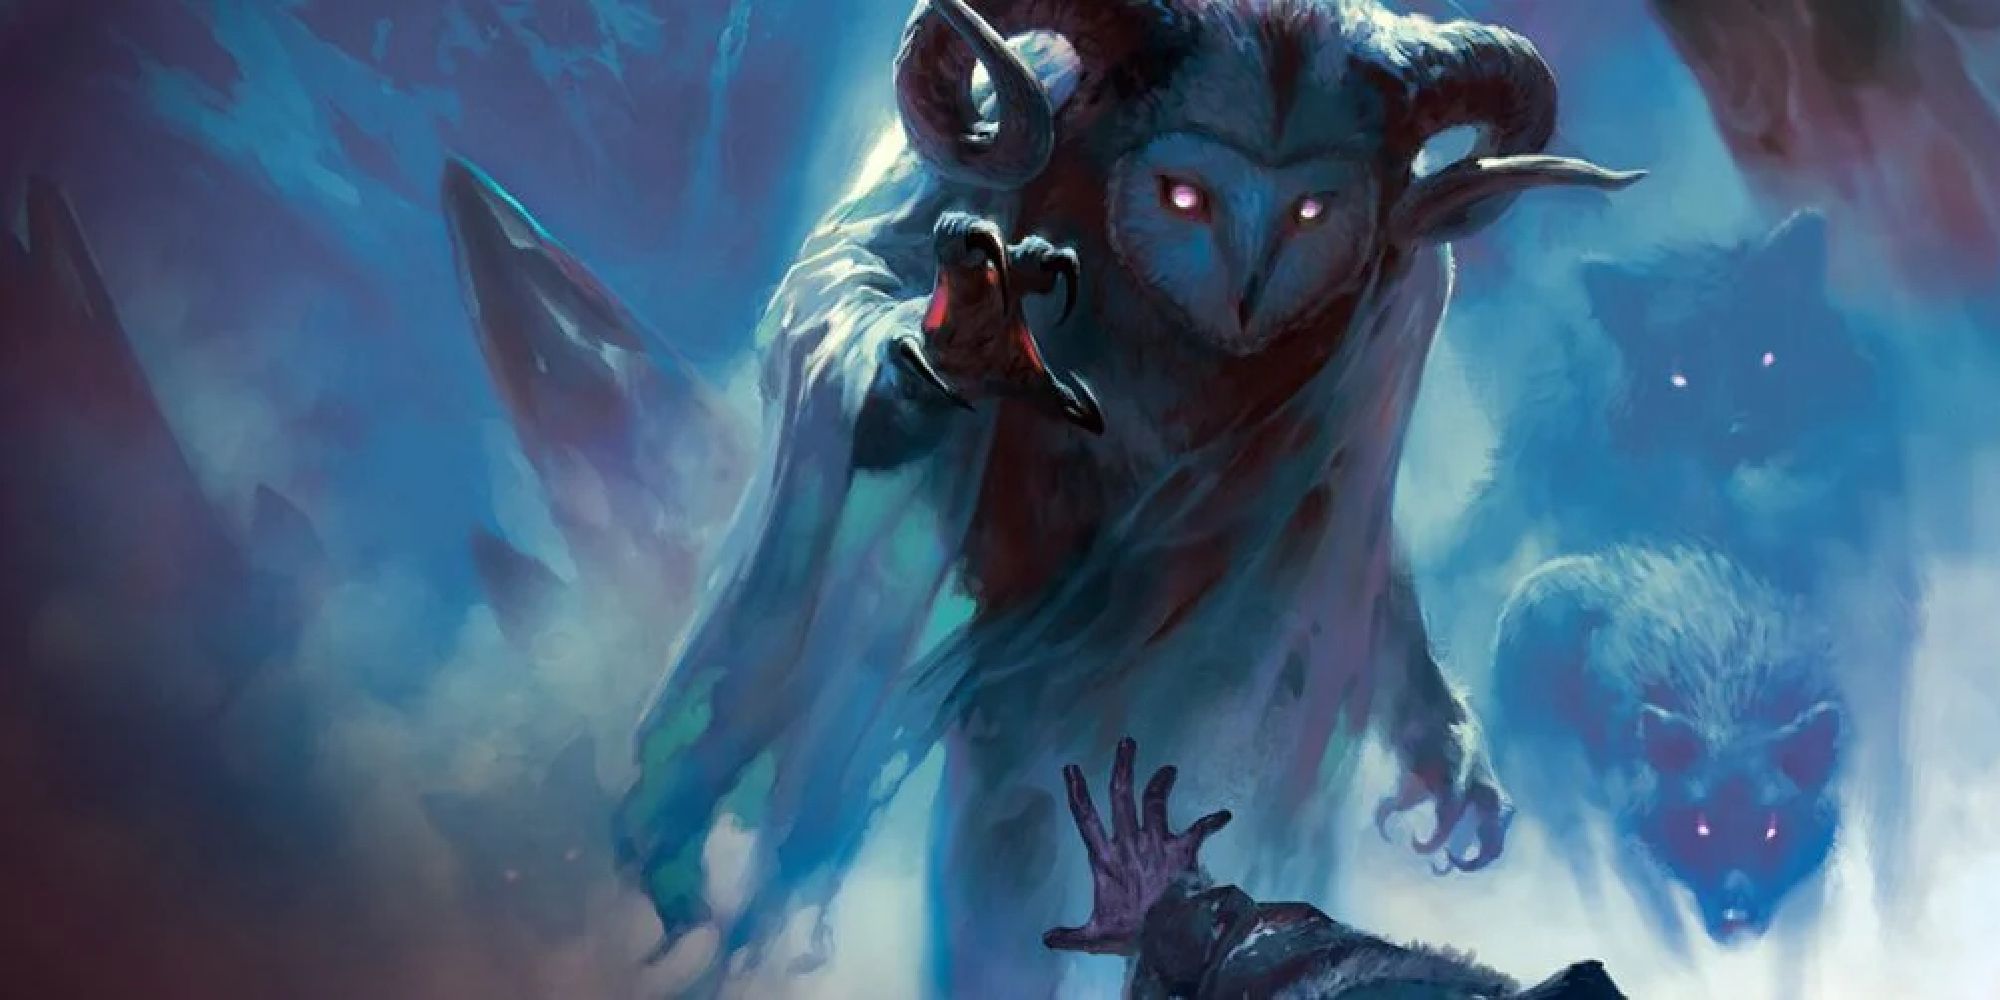 The frost maiden in her horned owl form, reaching one hand towards the adventurer as wolves follow after her.